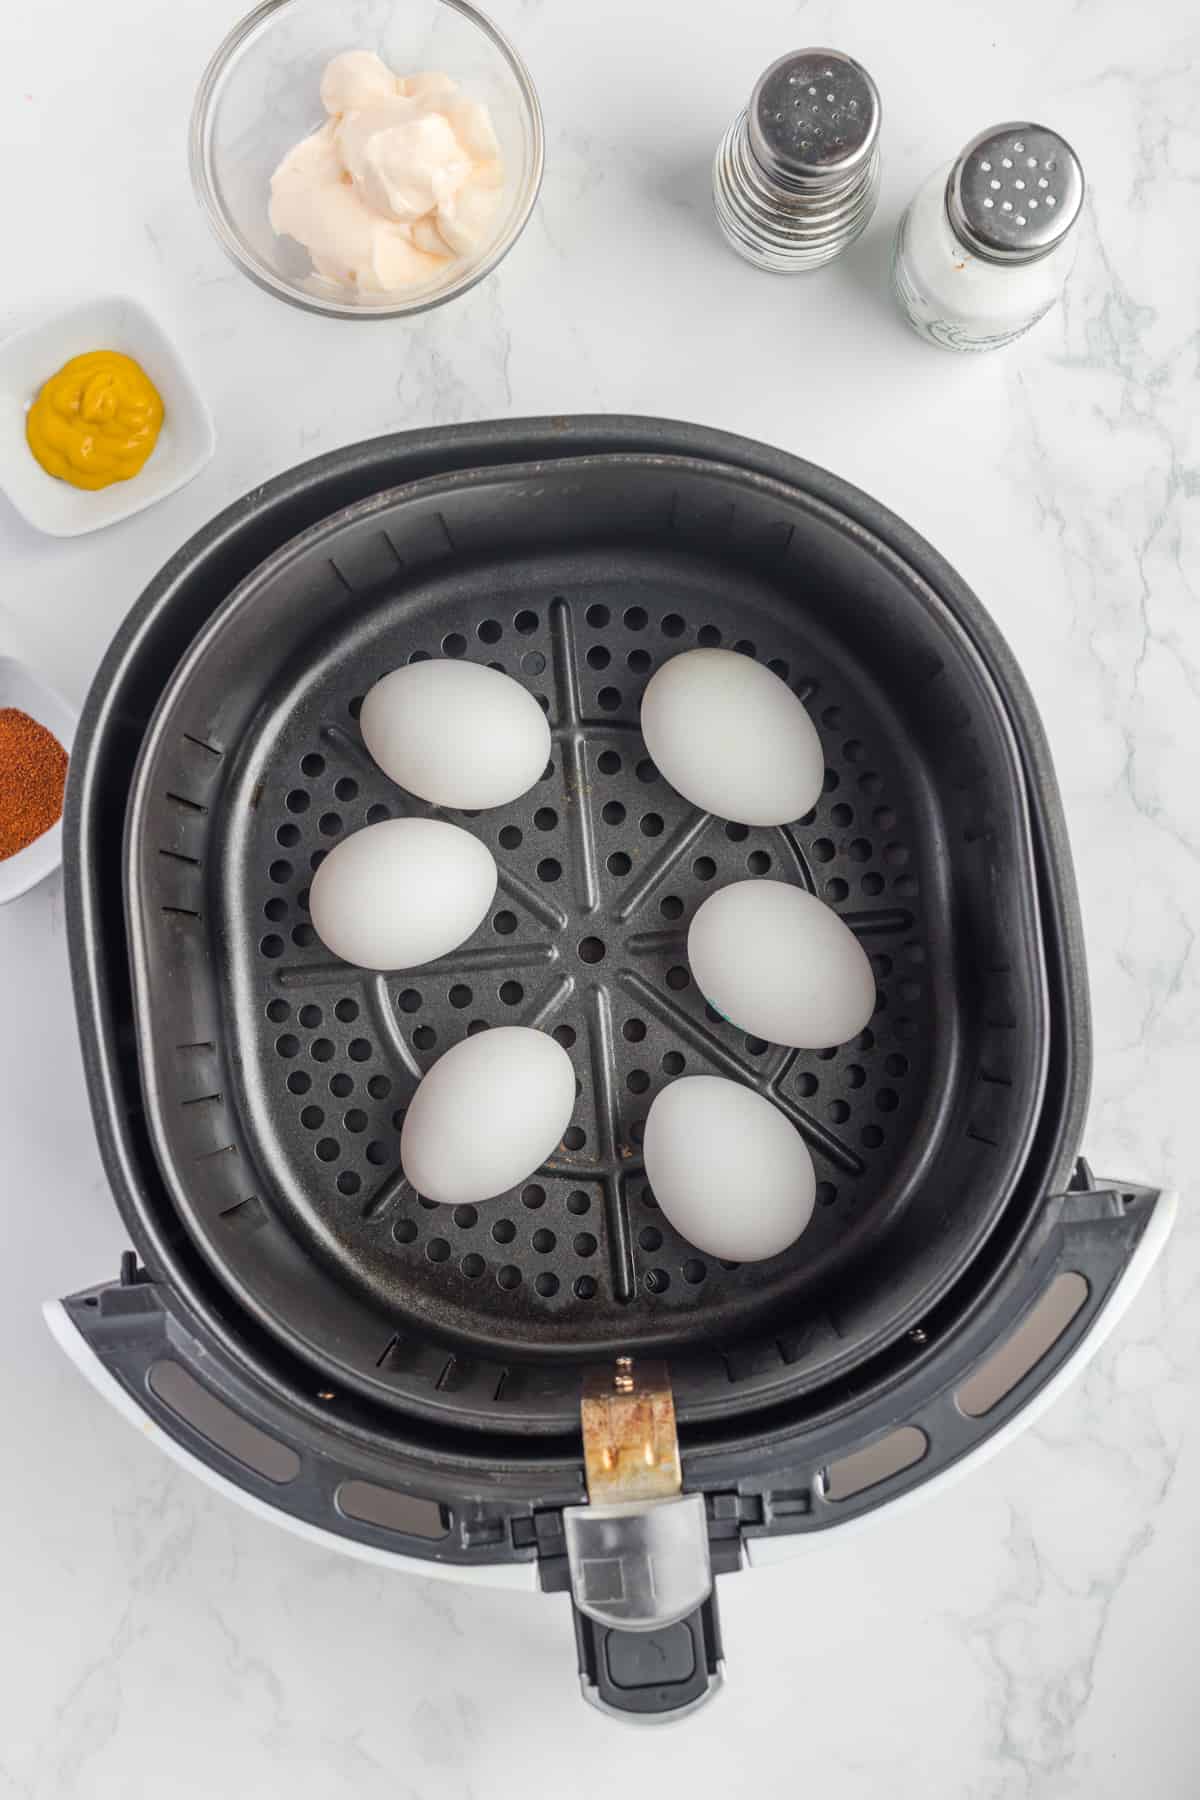 Eggs in the basket of the air fryer.